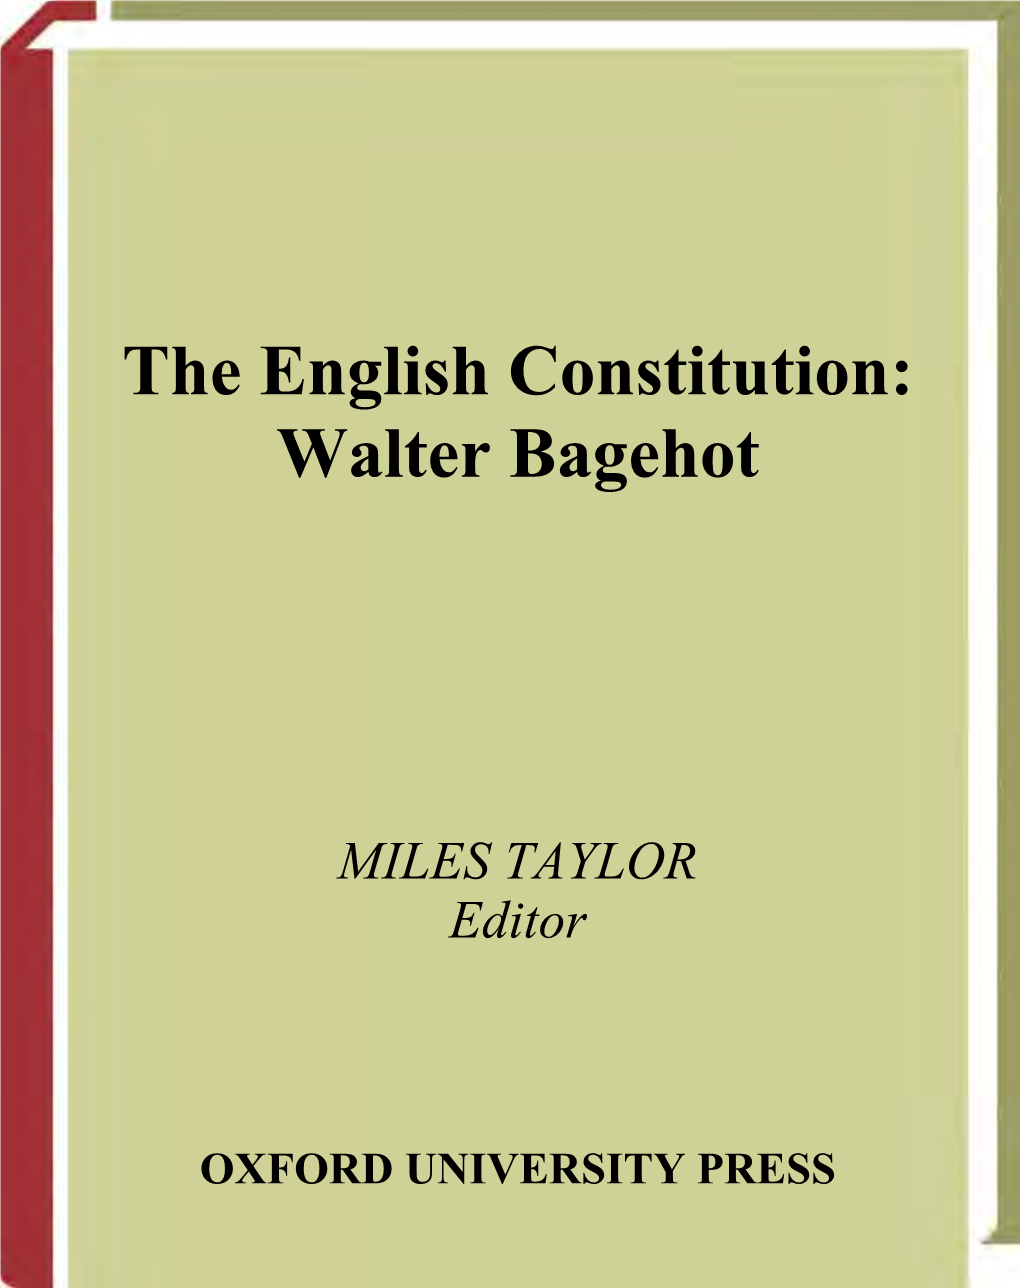 The English Constitution: Walter Bagehot